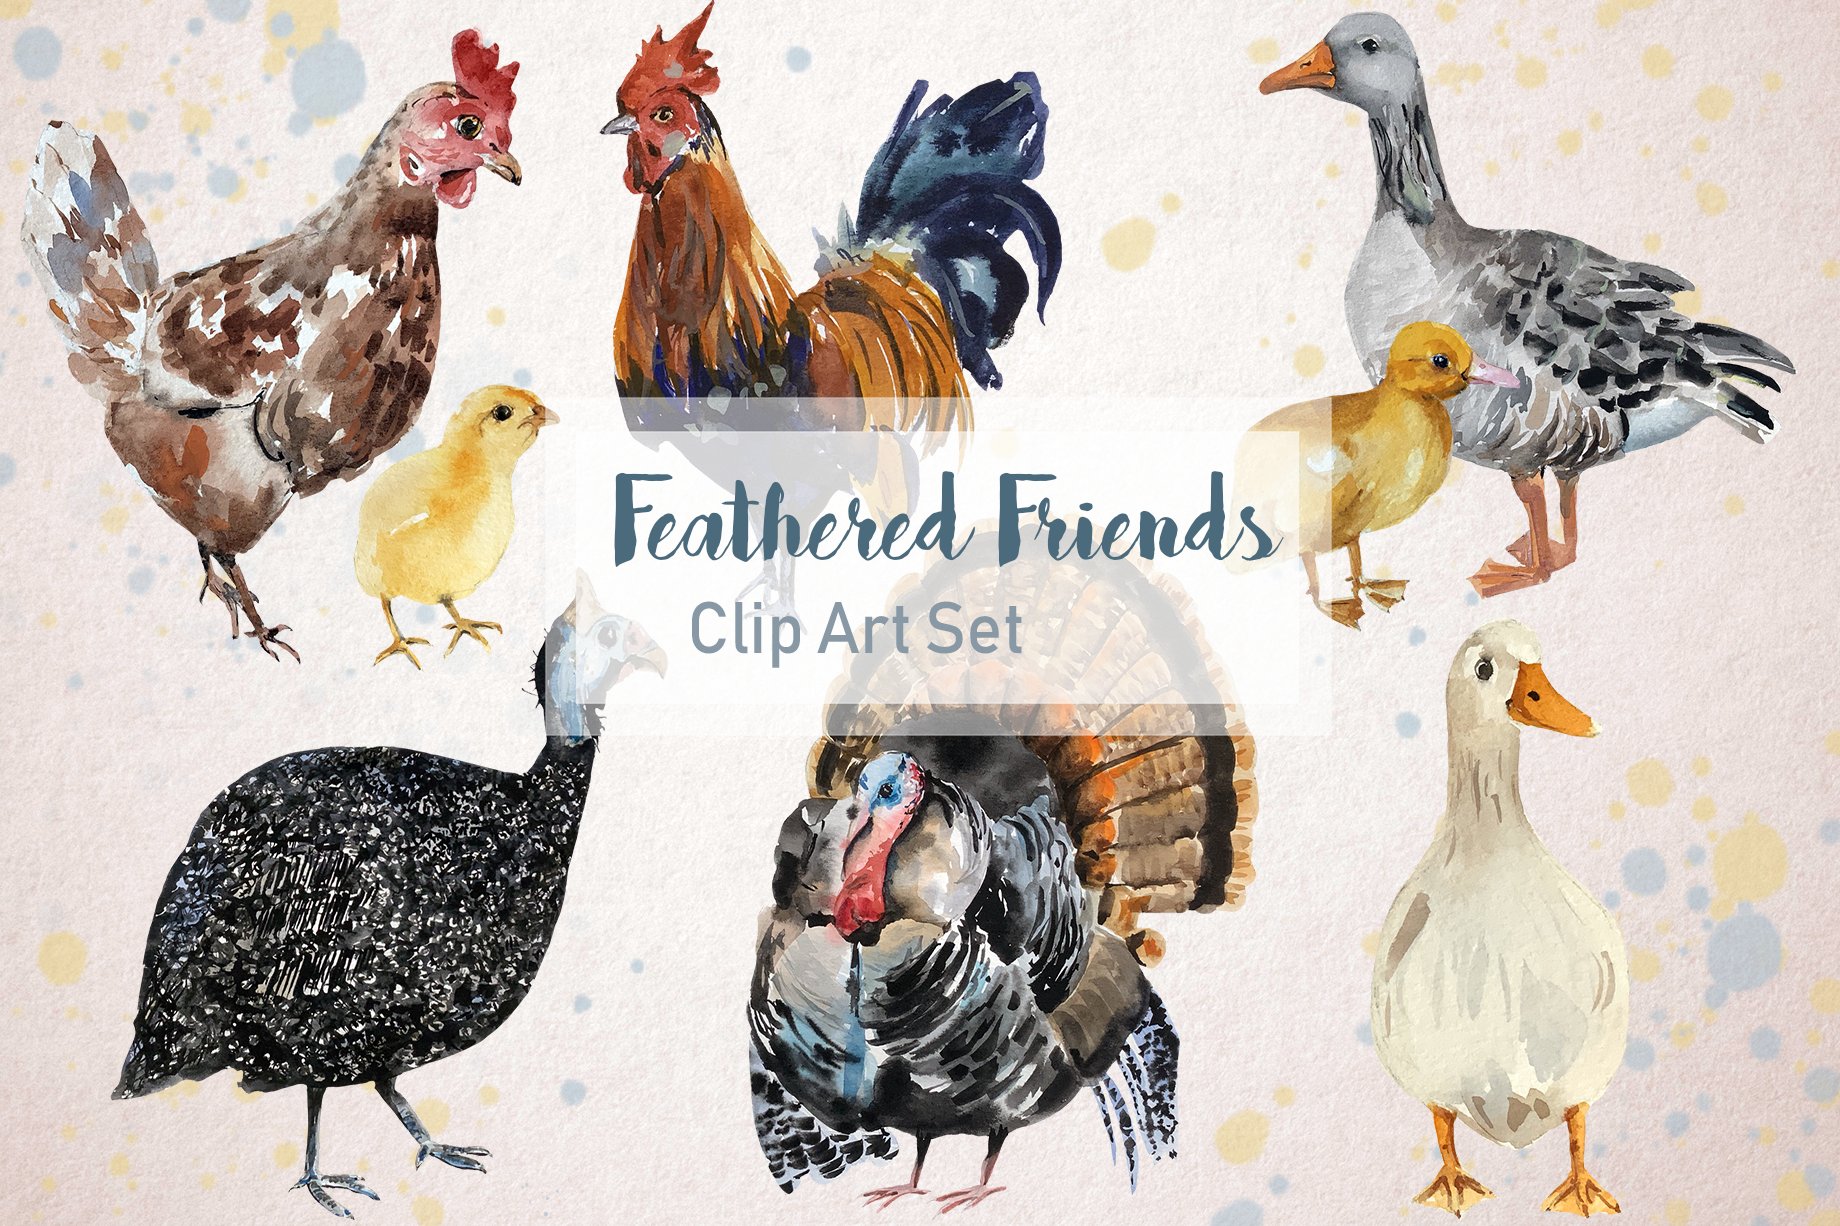 Feathered Friends Watercolor Clipart cover image.